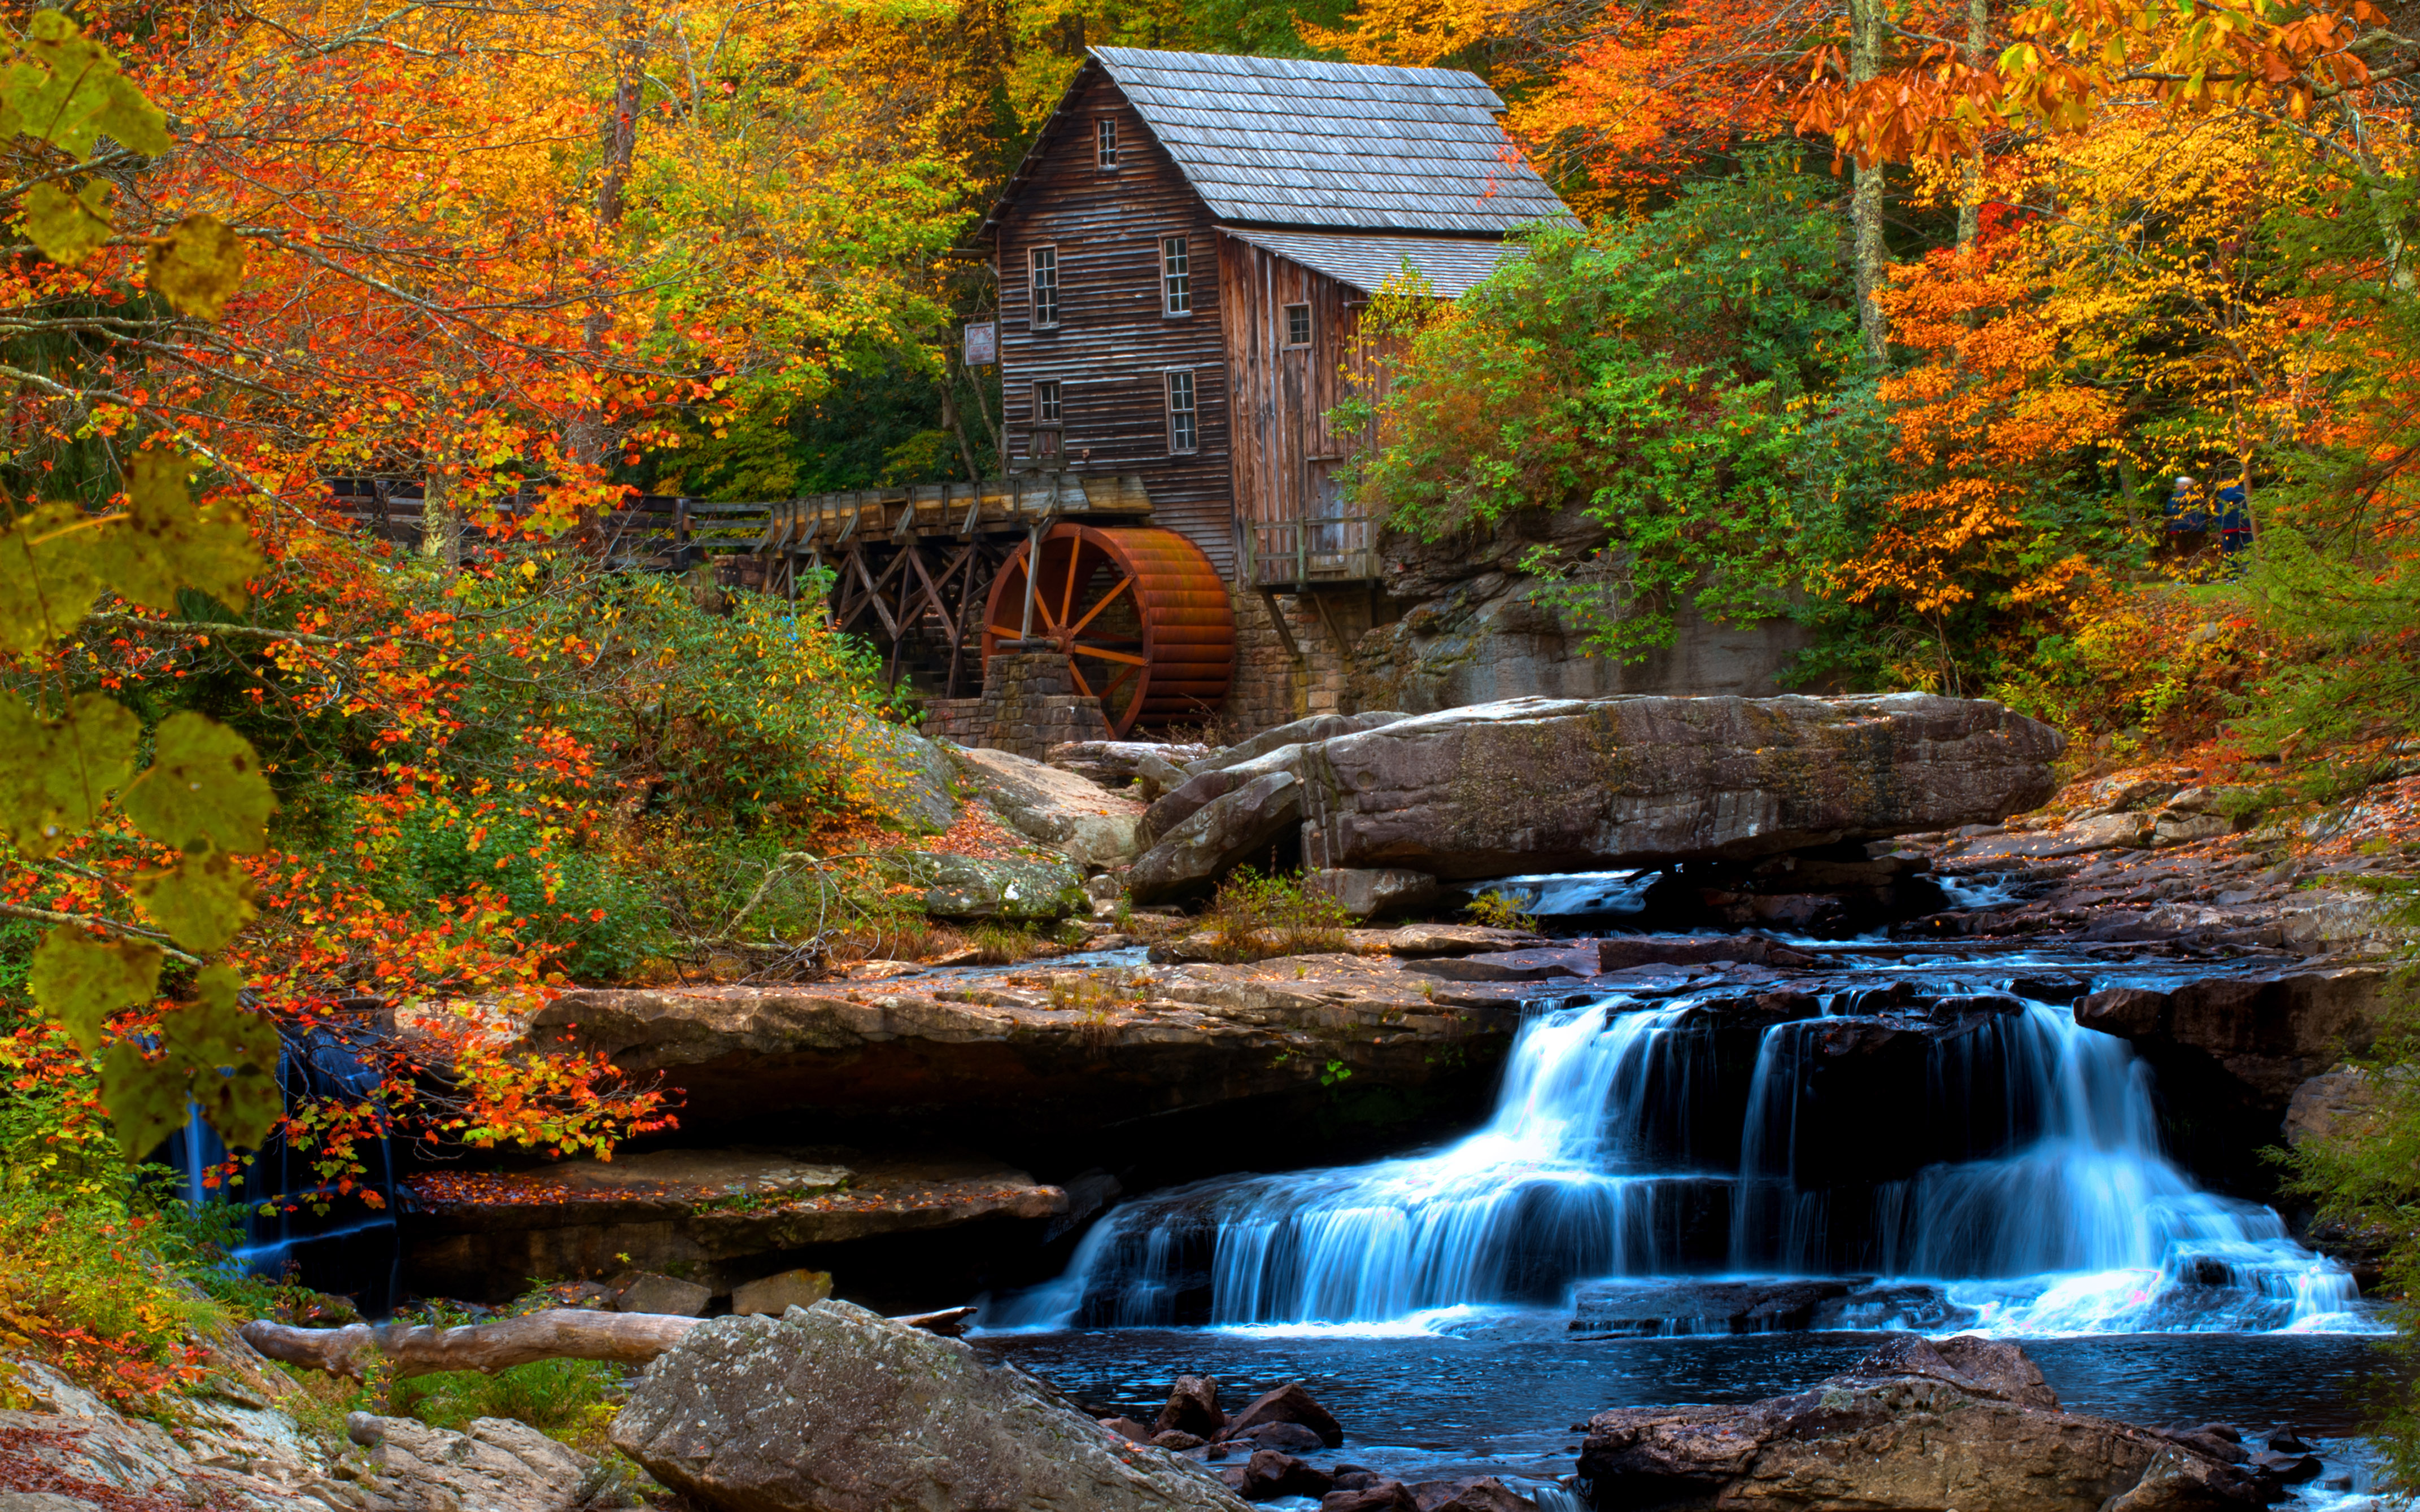 Grist Mill In The Fall - HD Wallpaper 